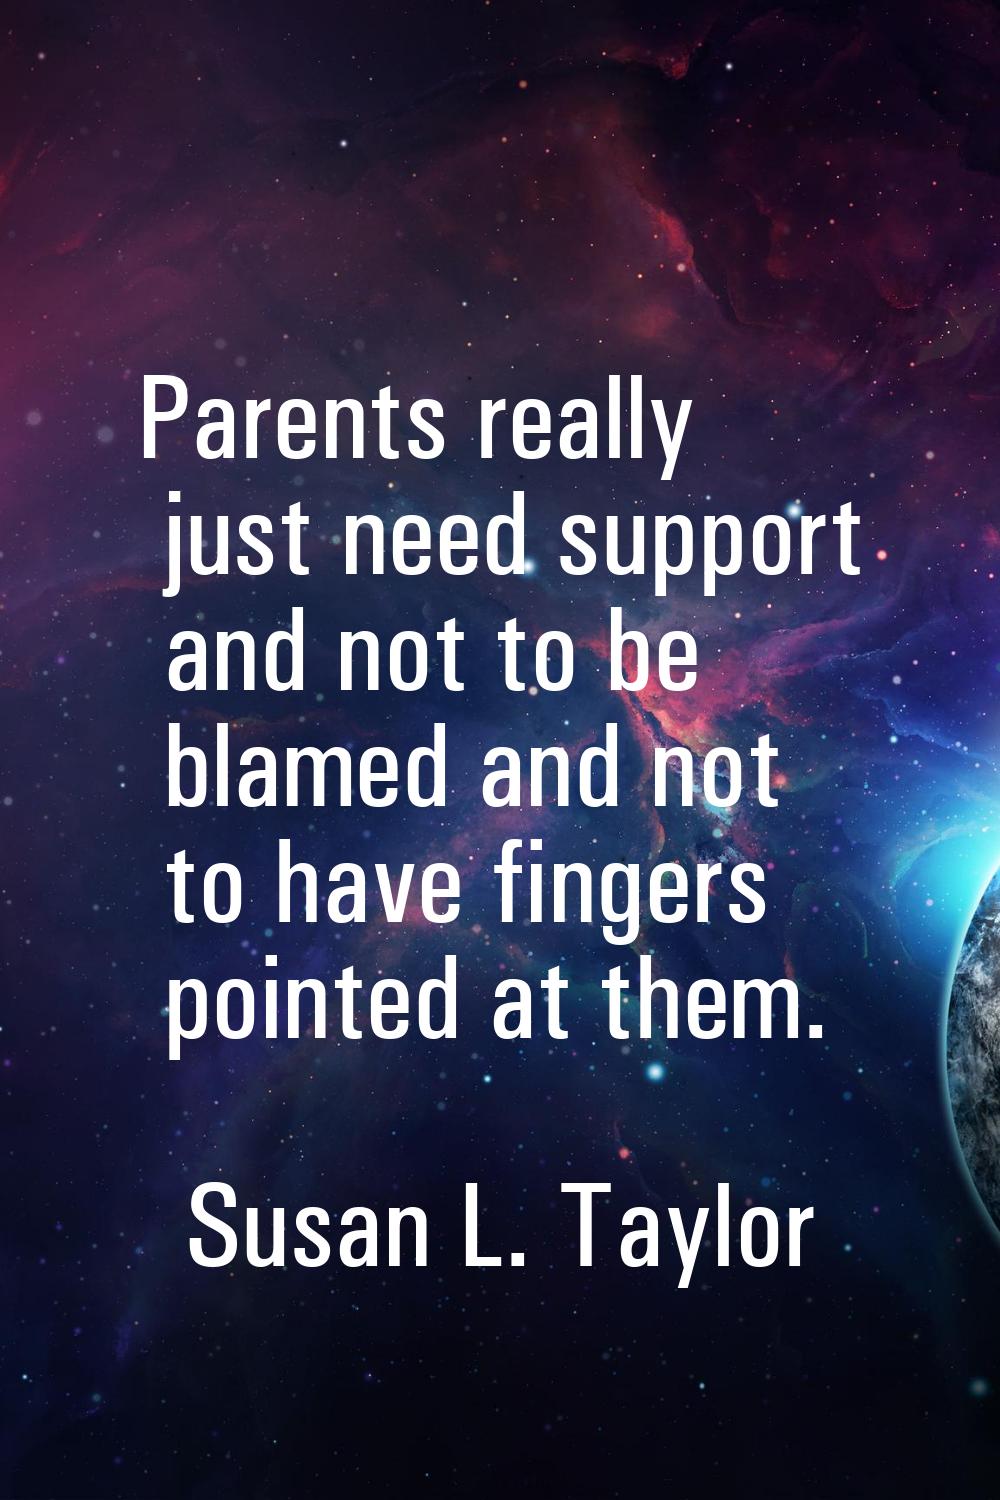 Parents really just need support and not to be blamed and not to have fingers pointed at them.